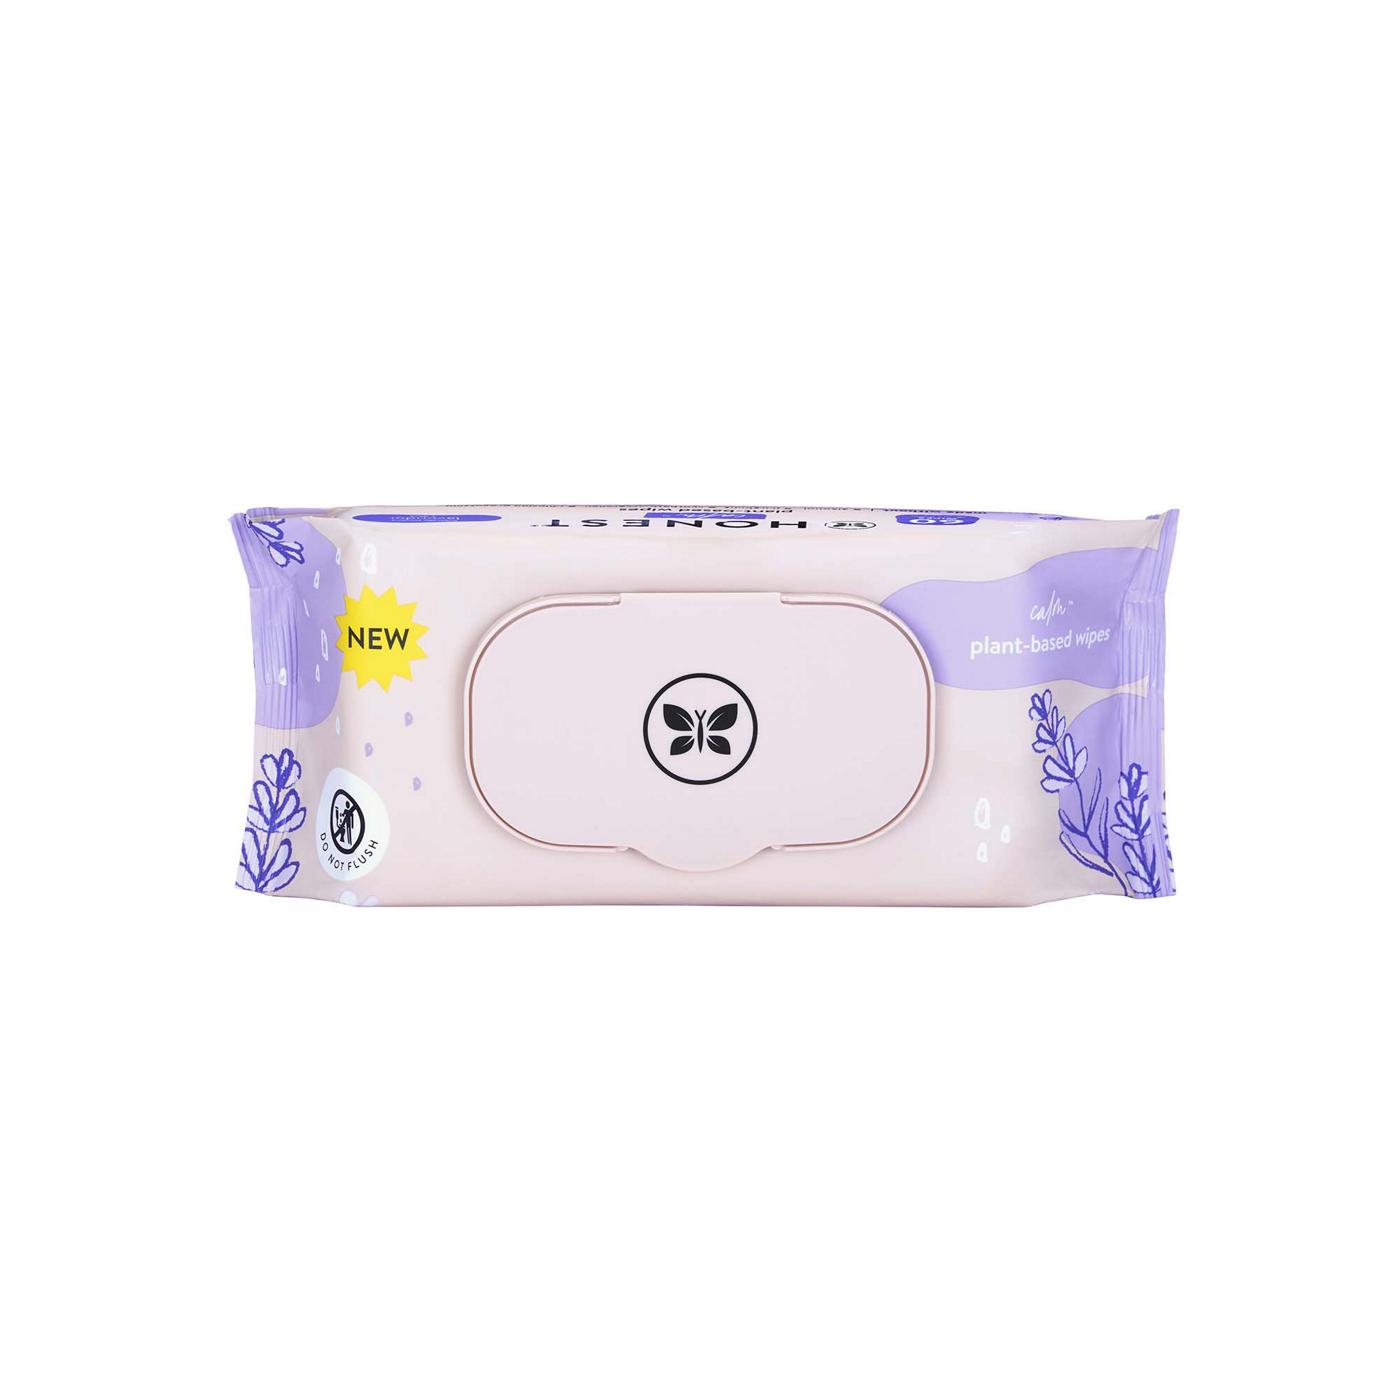 The Honest Company Calm Plant-Based Wipes - Lavender; image 2 of 4